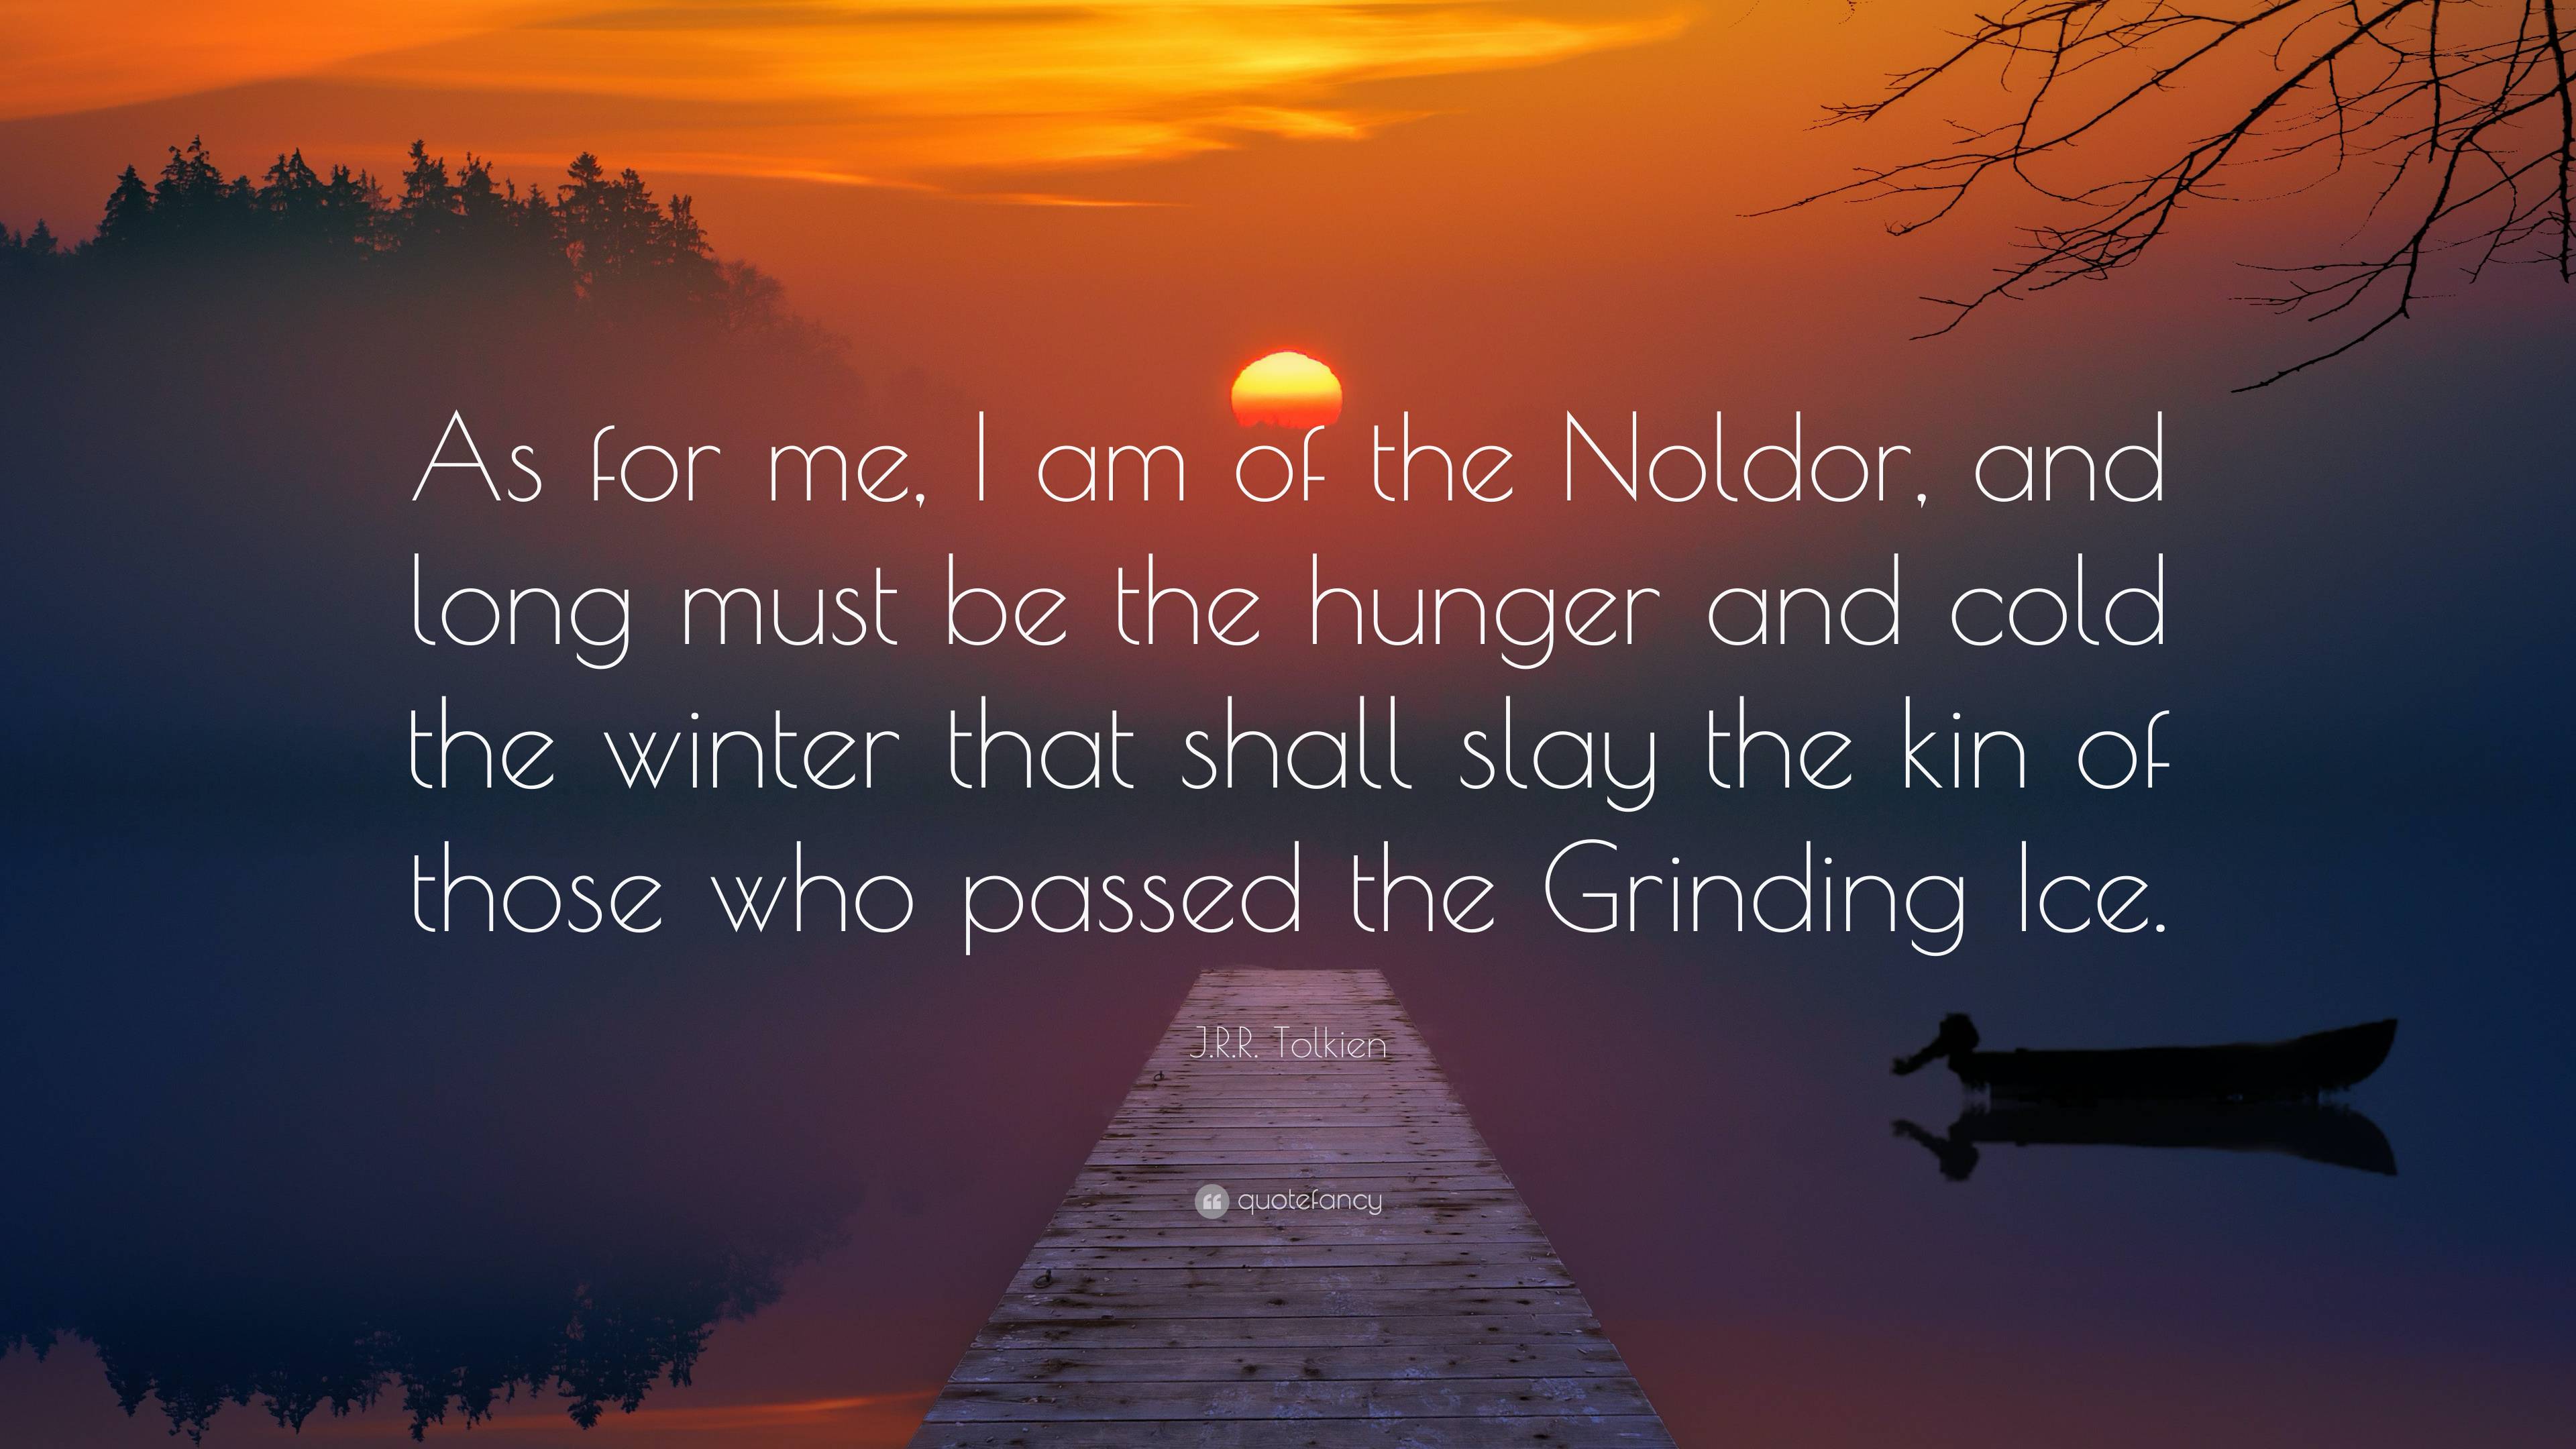 J.R.R. Tolkien Quote: “As for me, I am of the Noldor, and long must be ...